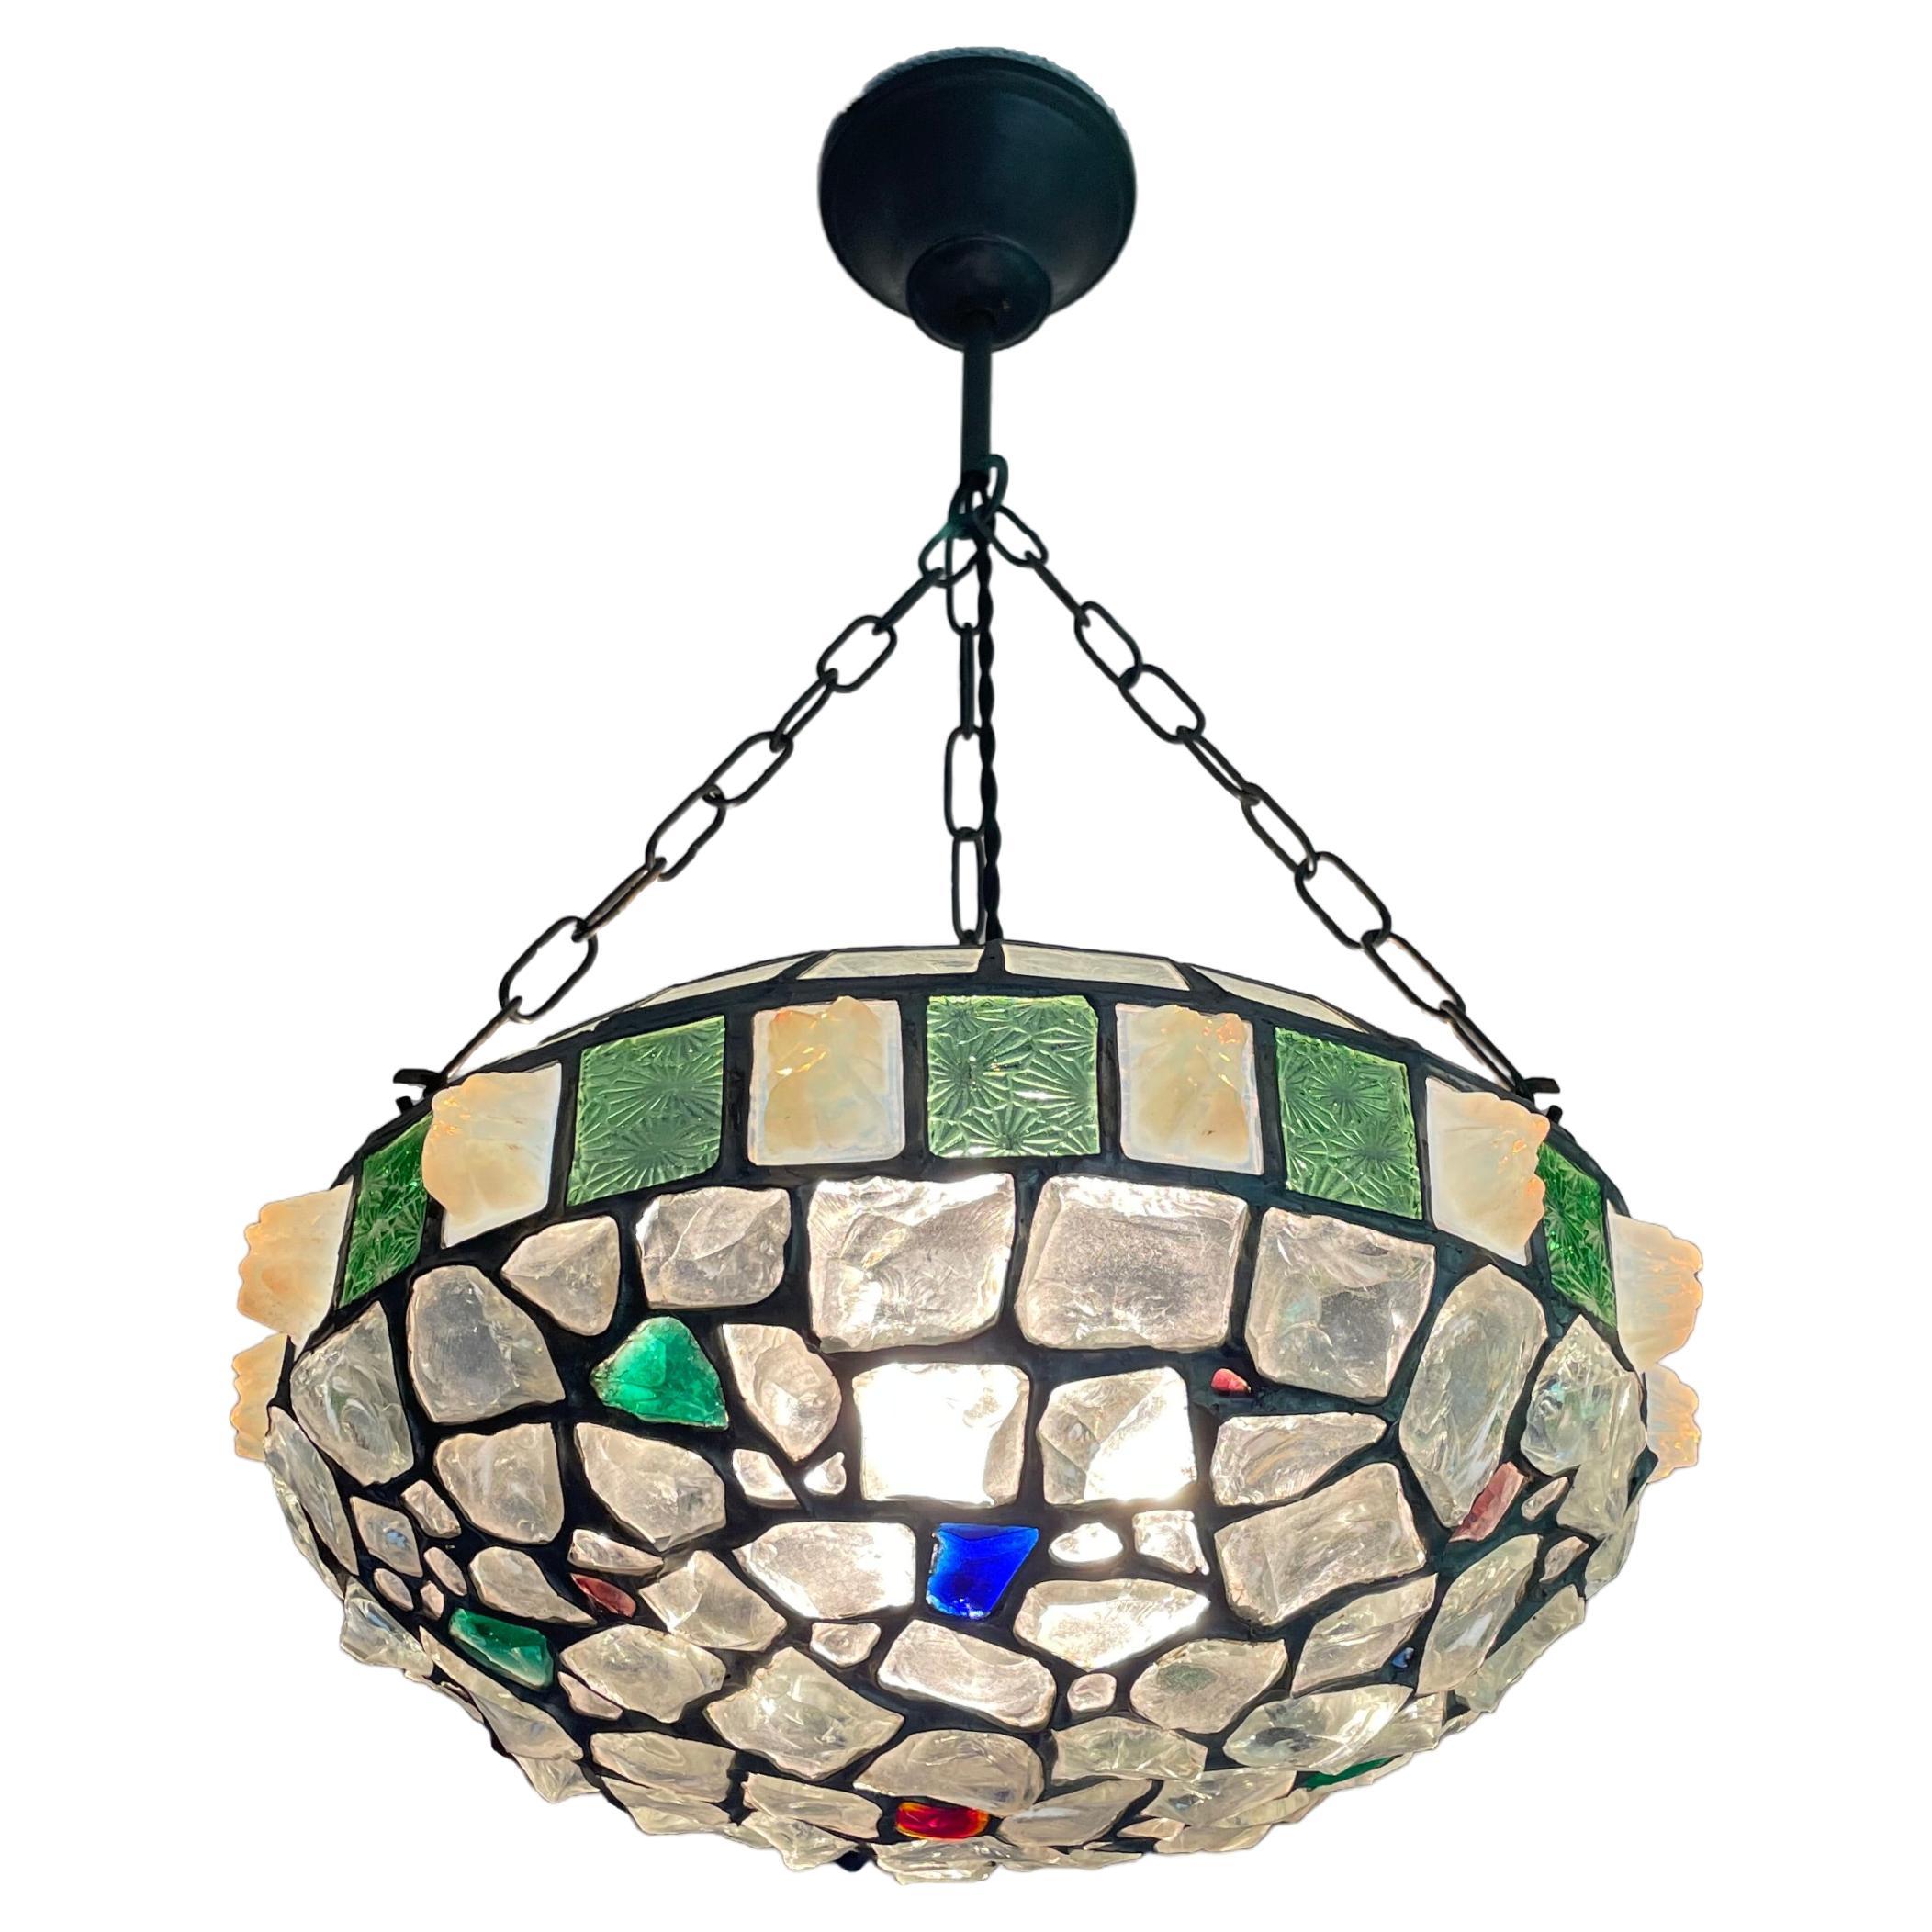 Handmade Glorious Antique Stained & Chunky Glass Arts & Craft Pendant Light